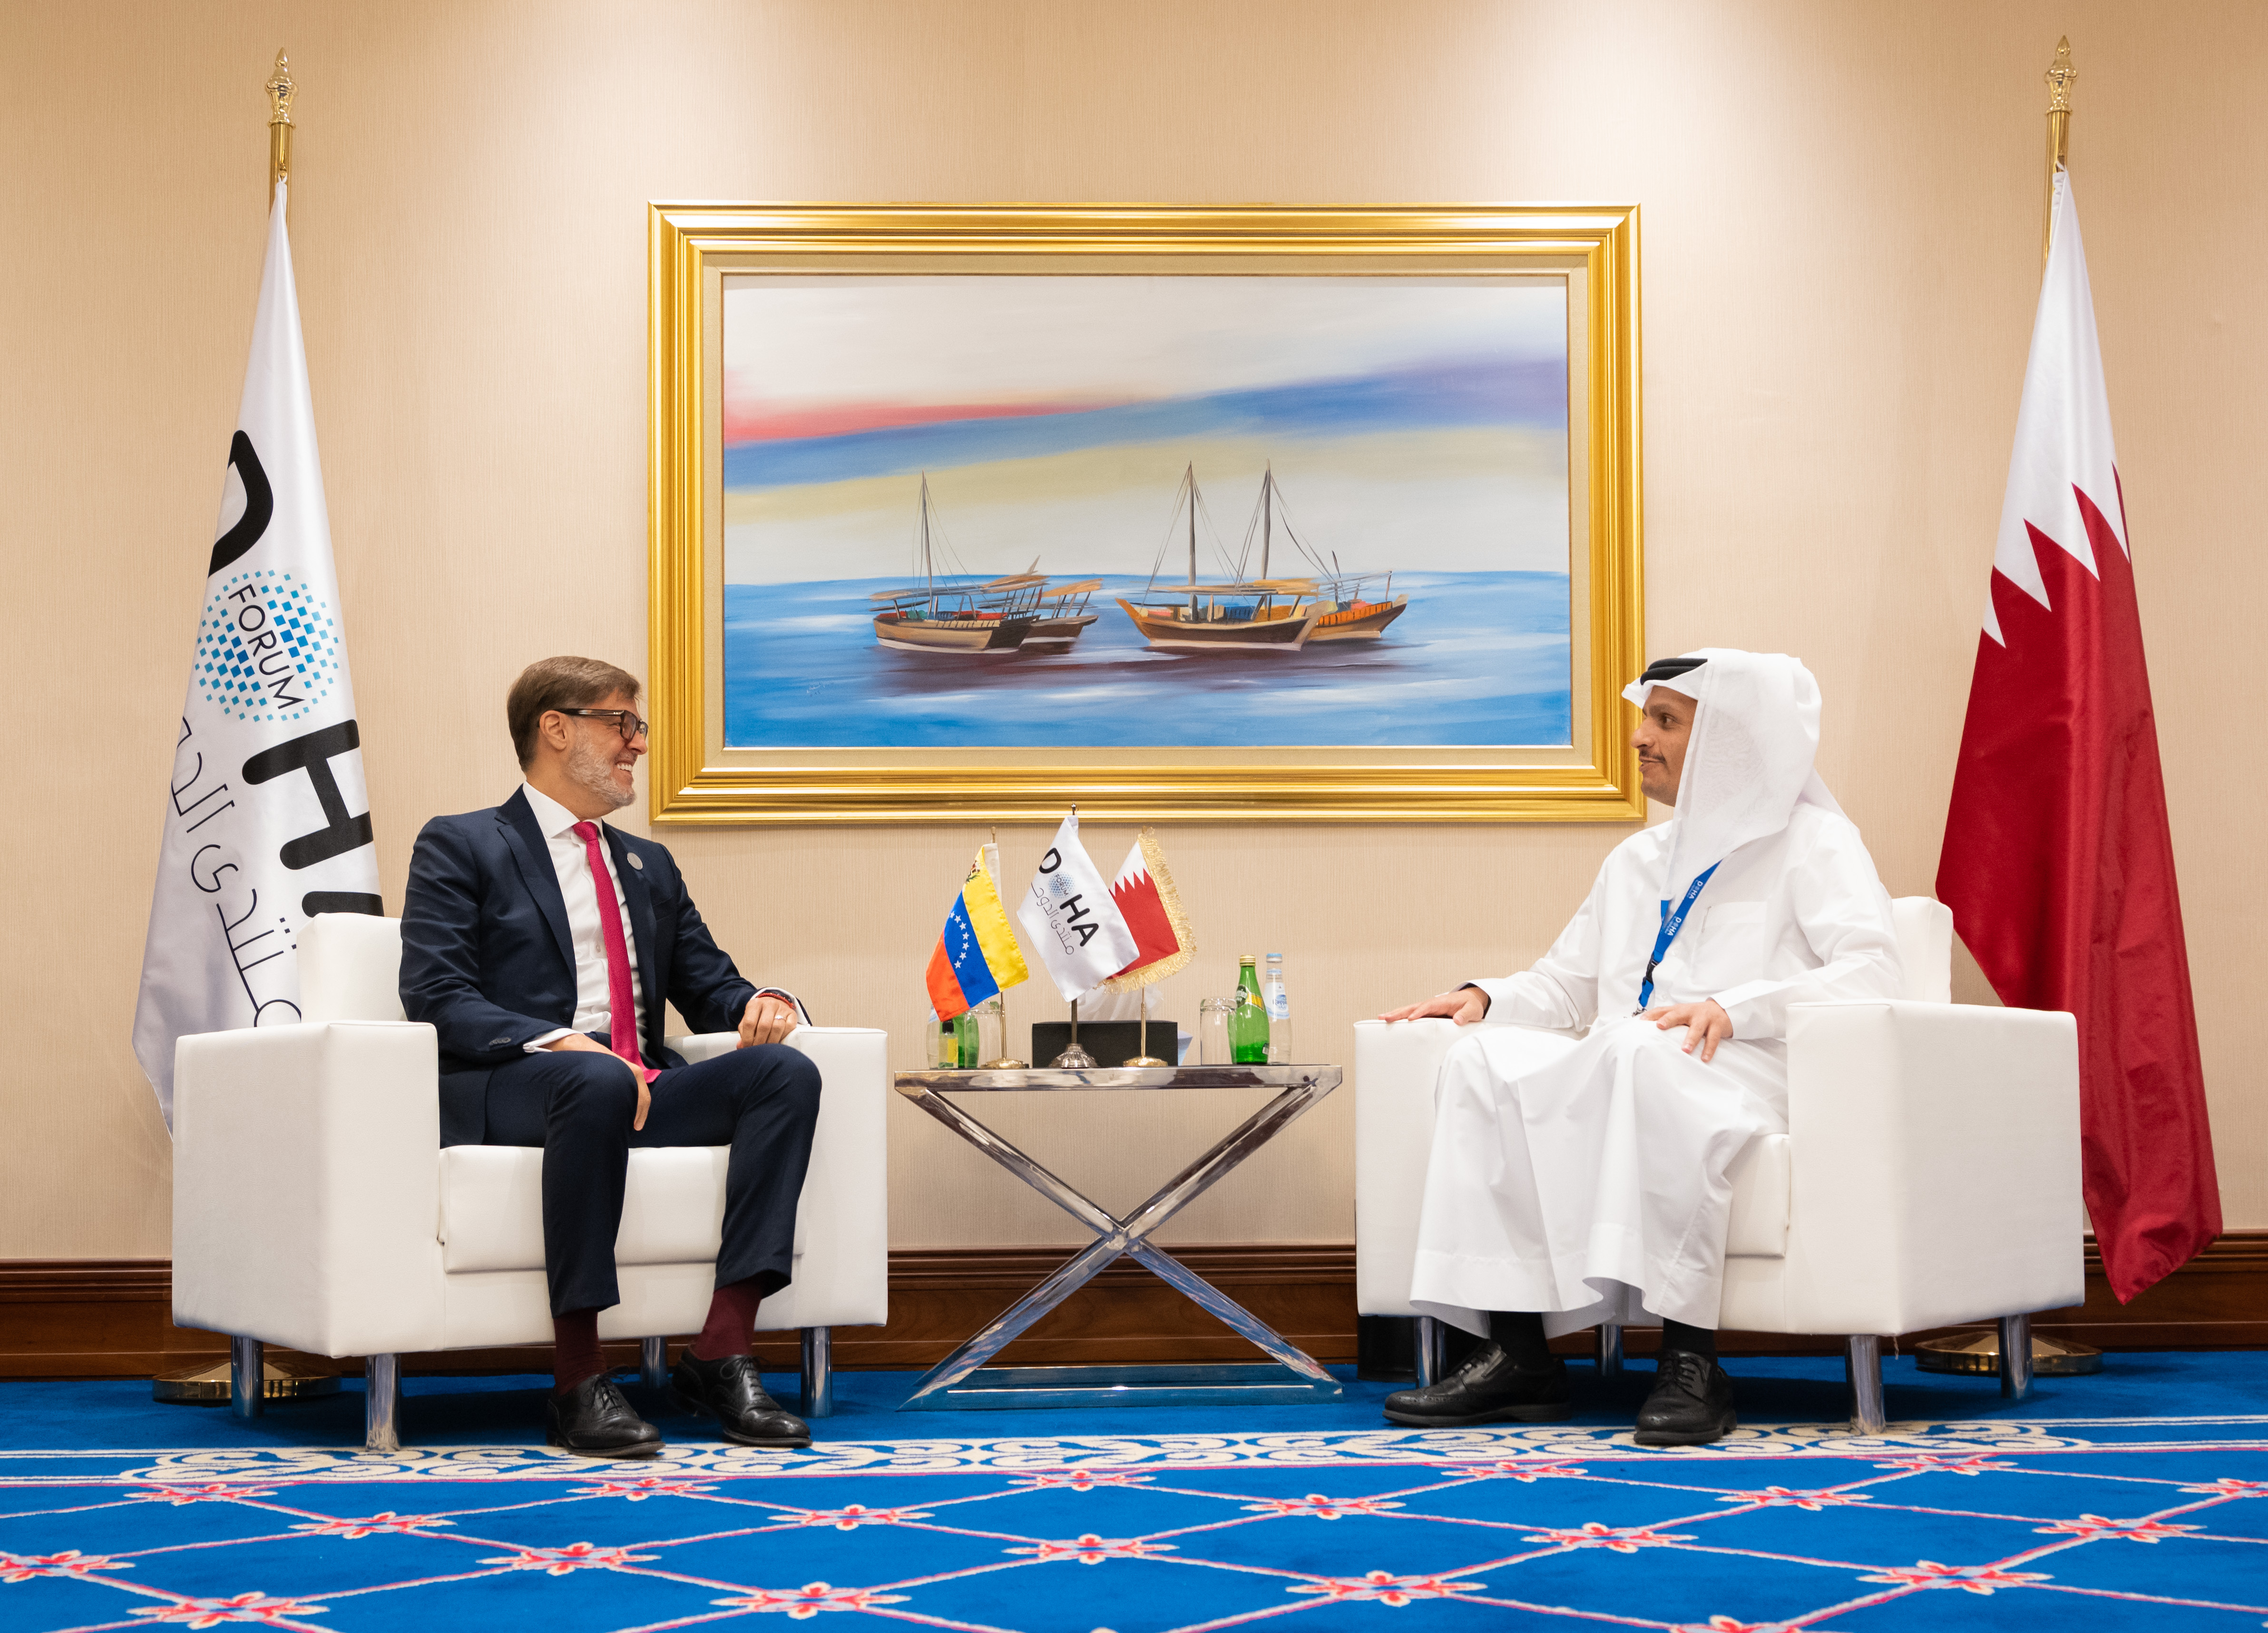 Deputy Prime Minister and Minister of Foreign Affairs Meets Officials